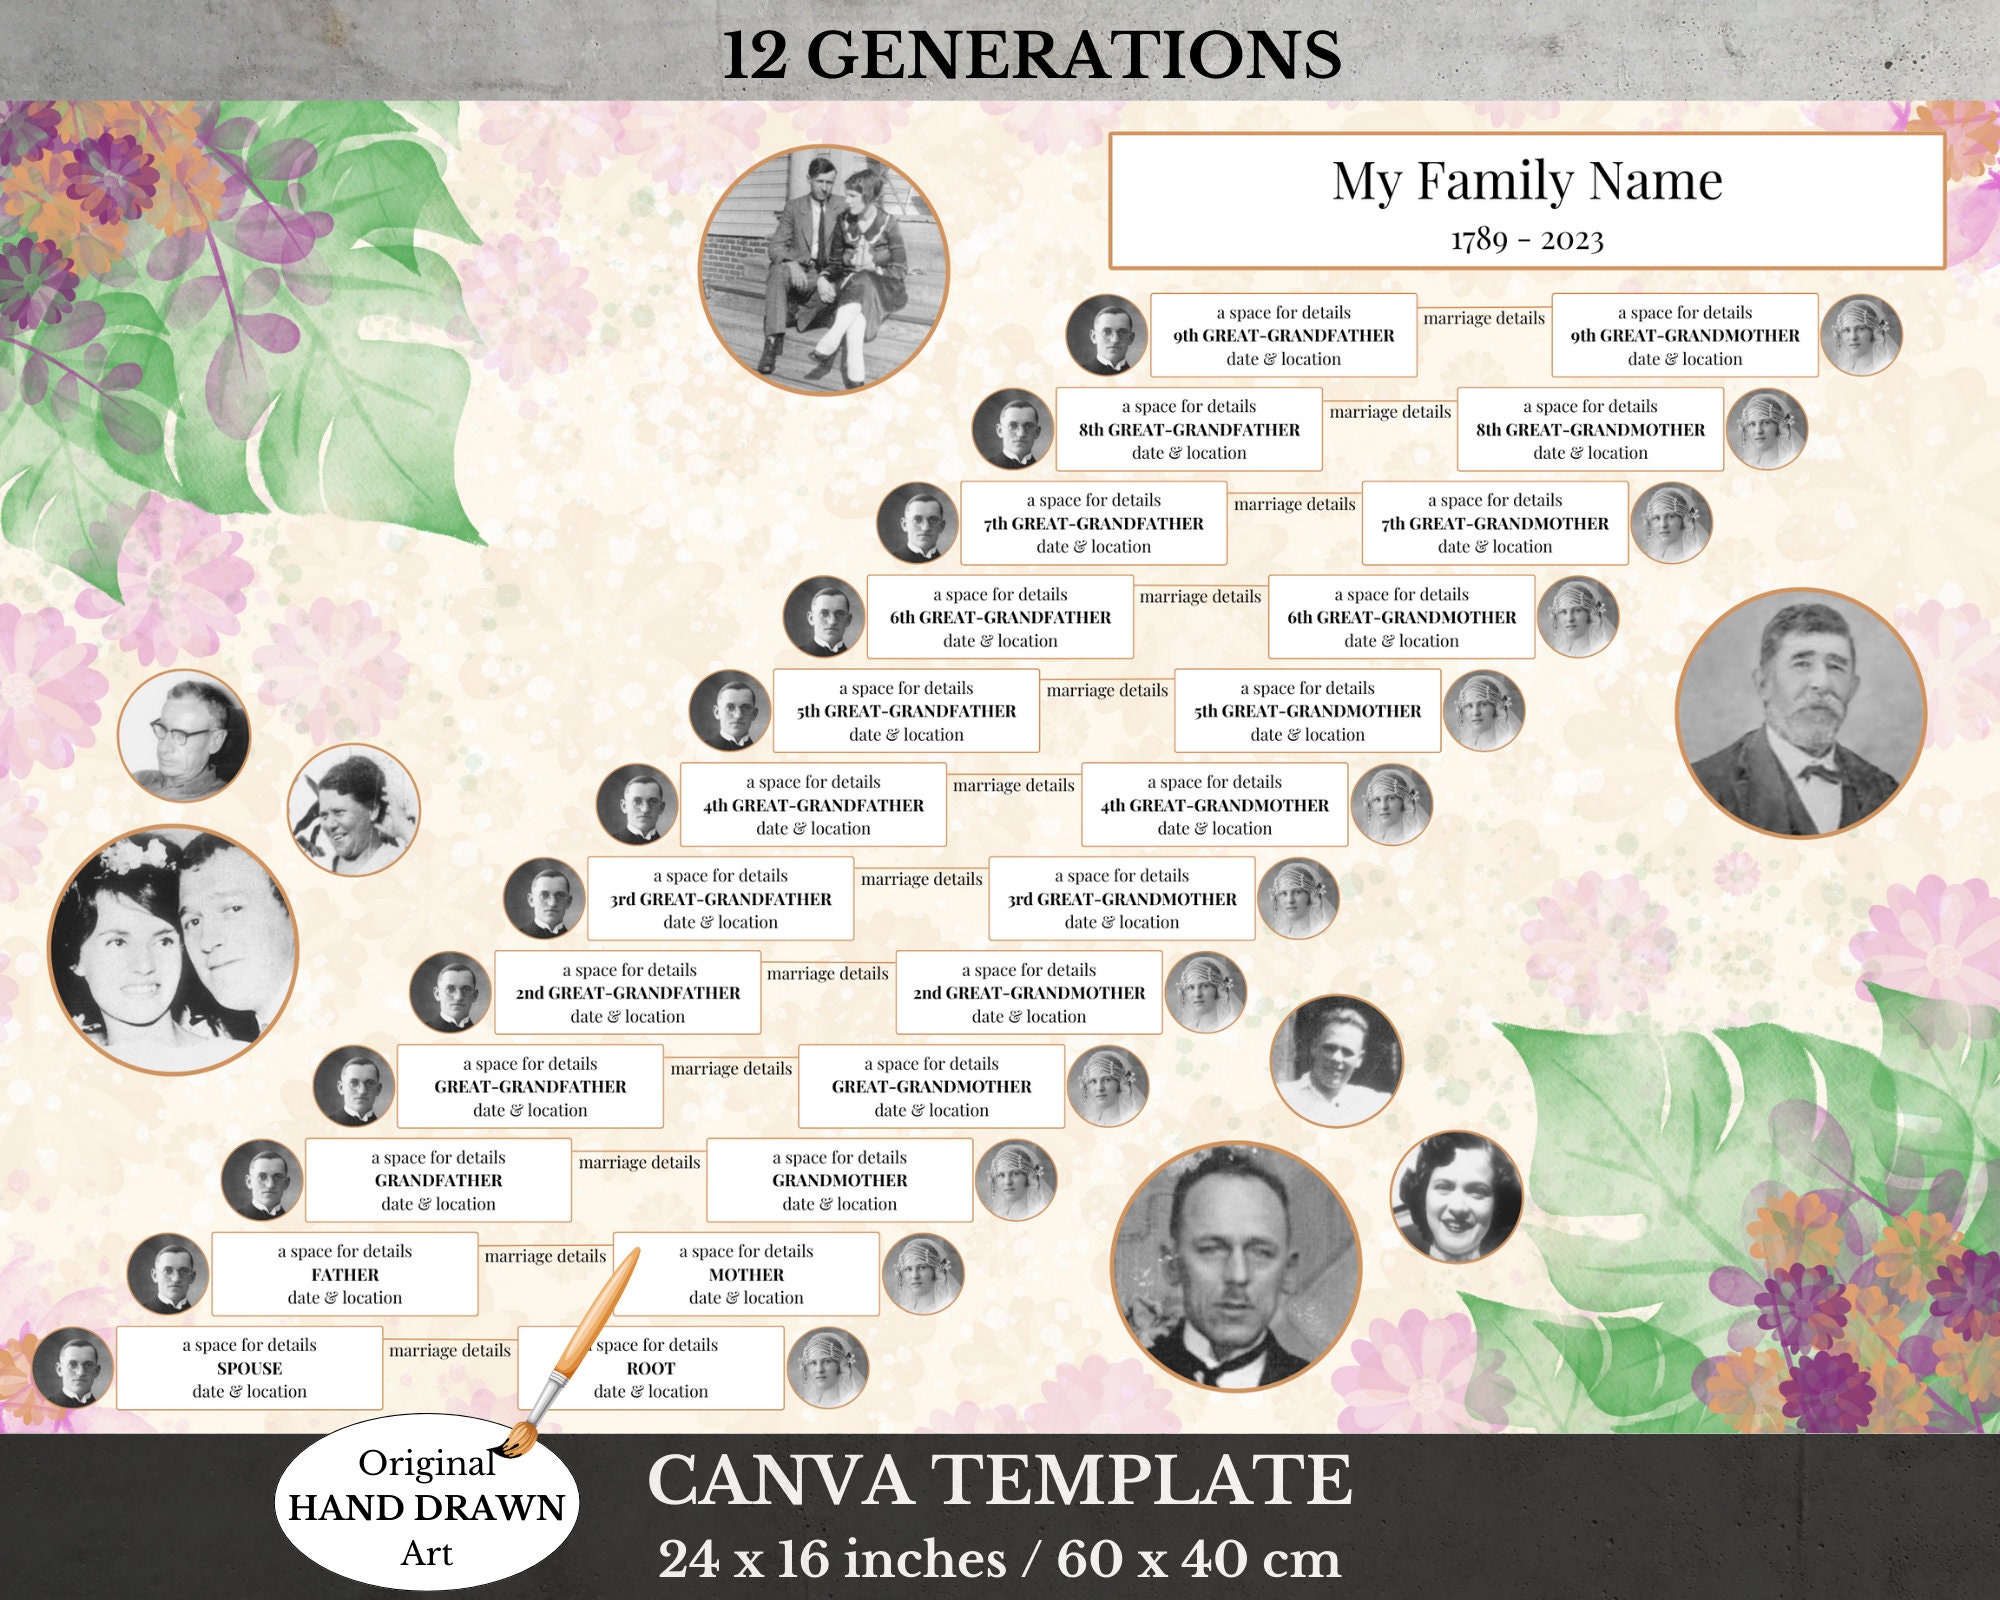 Family Tree Chart To Fill In Fillable Generations Genealogy Chart And Forms  Photo Canvas Genealogy - AliExpress